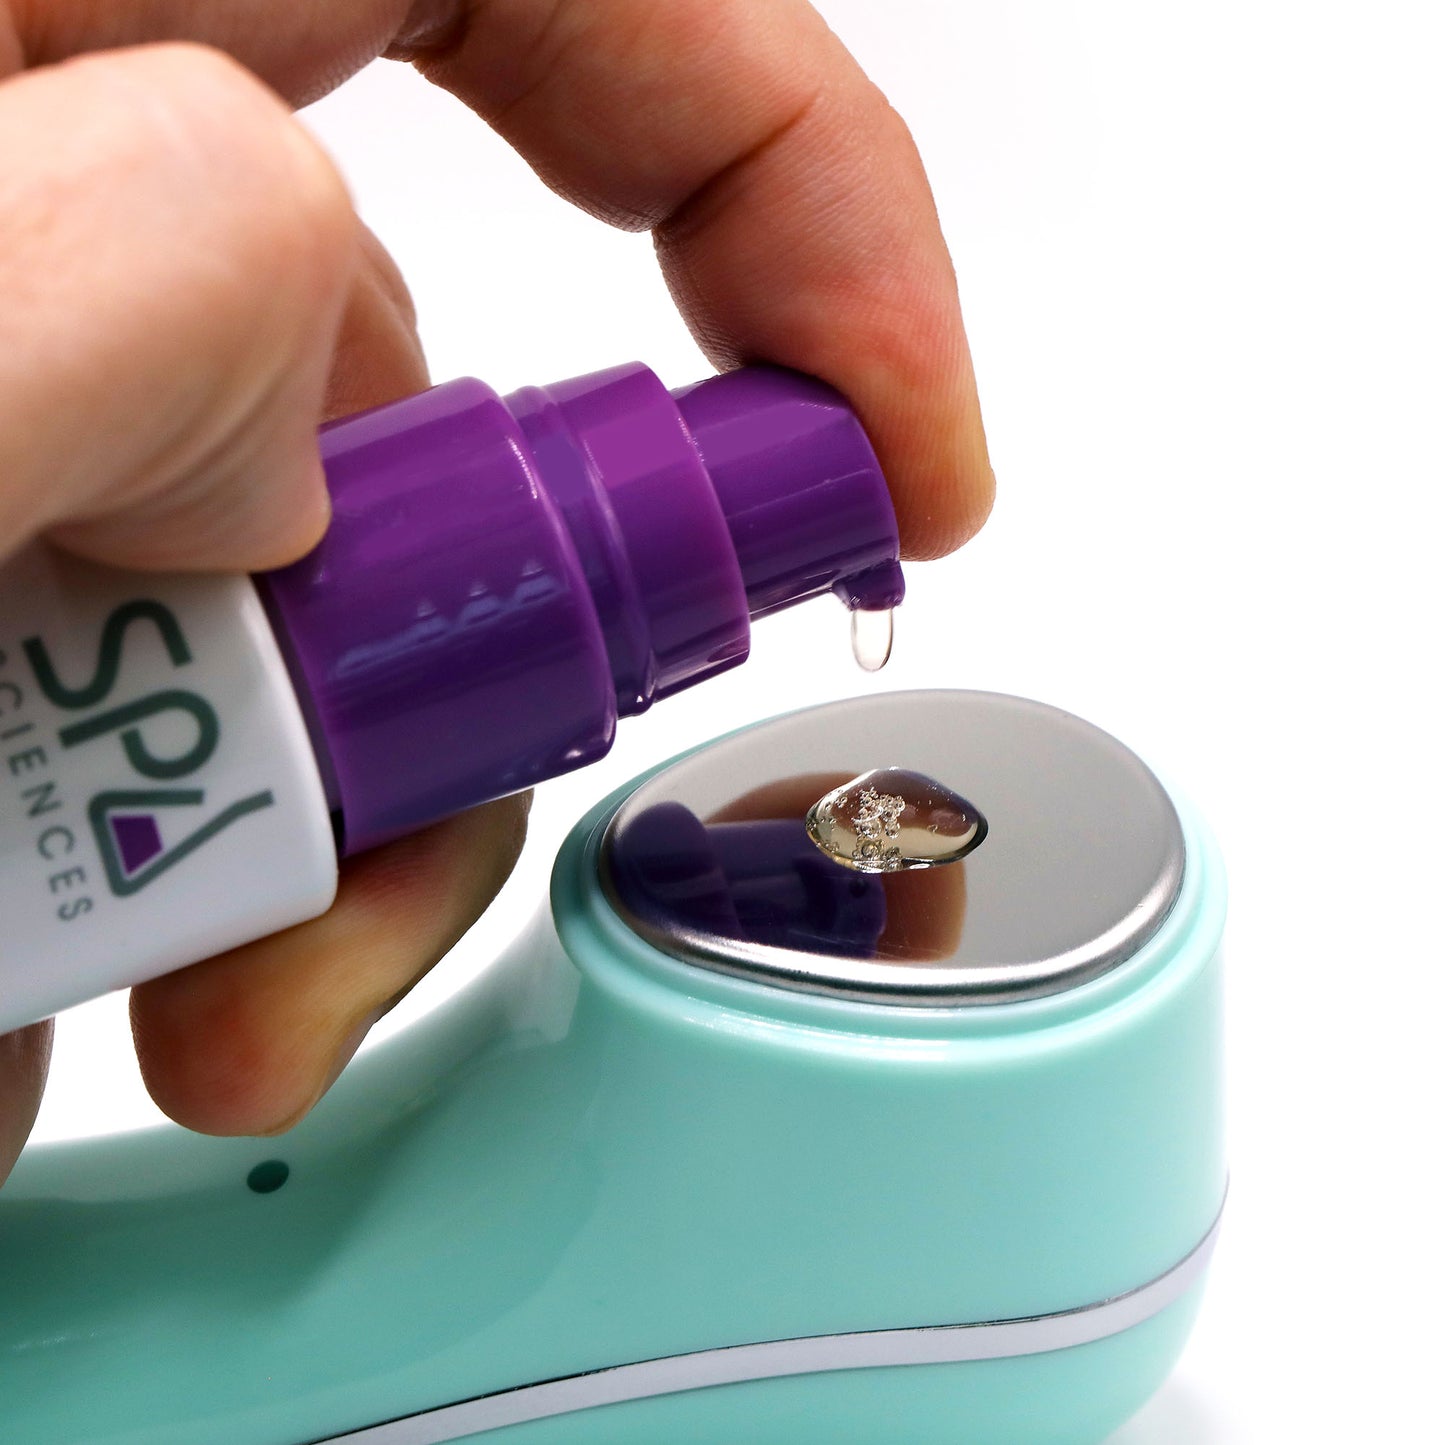 A person is using a Spa Sciences Ultimate Moisture Bundle device to apply a purple liquid.